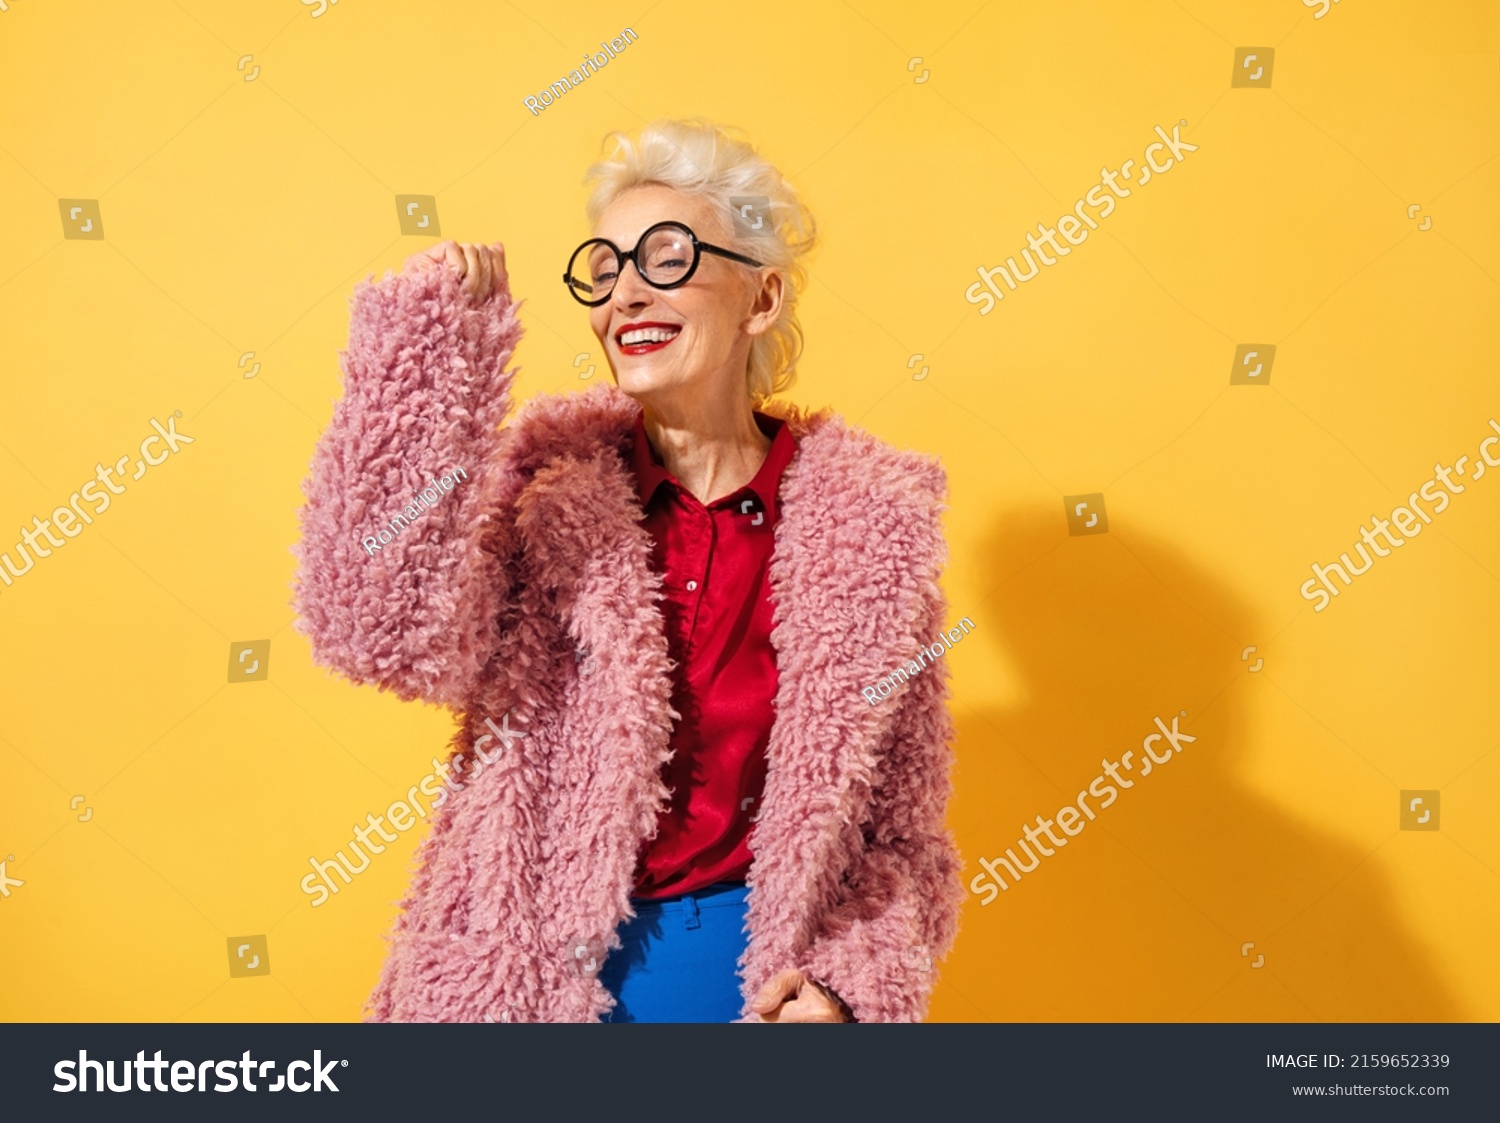 Happy and playful mature woman dancing, smiling and having fun. Photo of elderly woman above 70 years old in stylish outfit on yellow background #2159652339